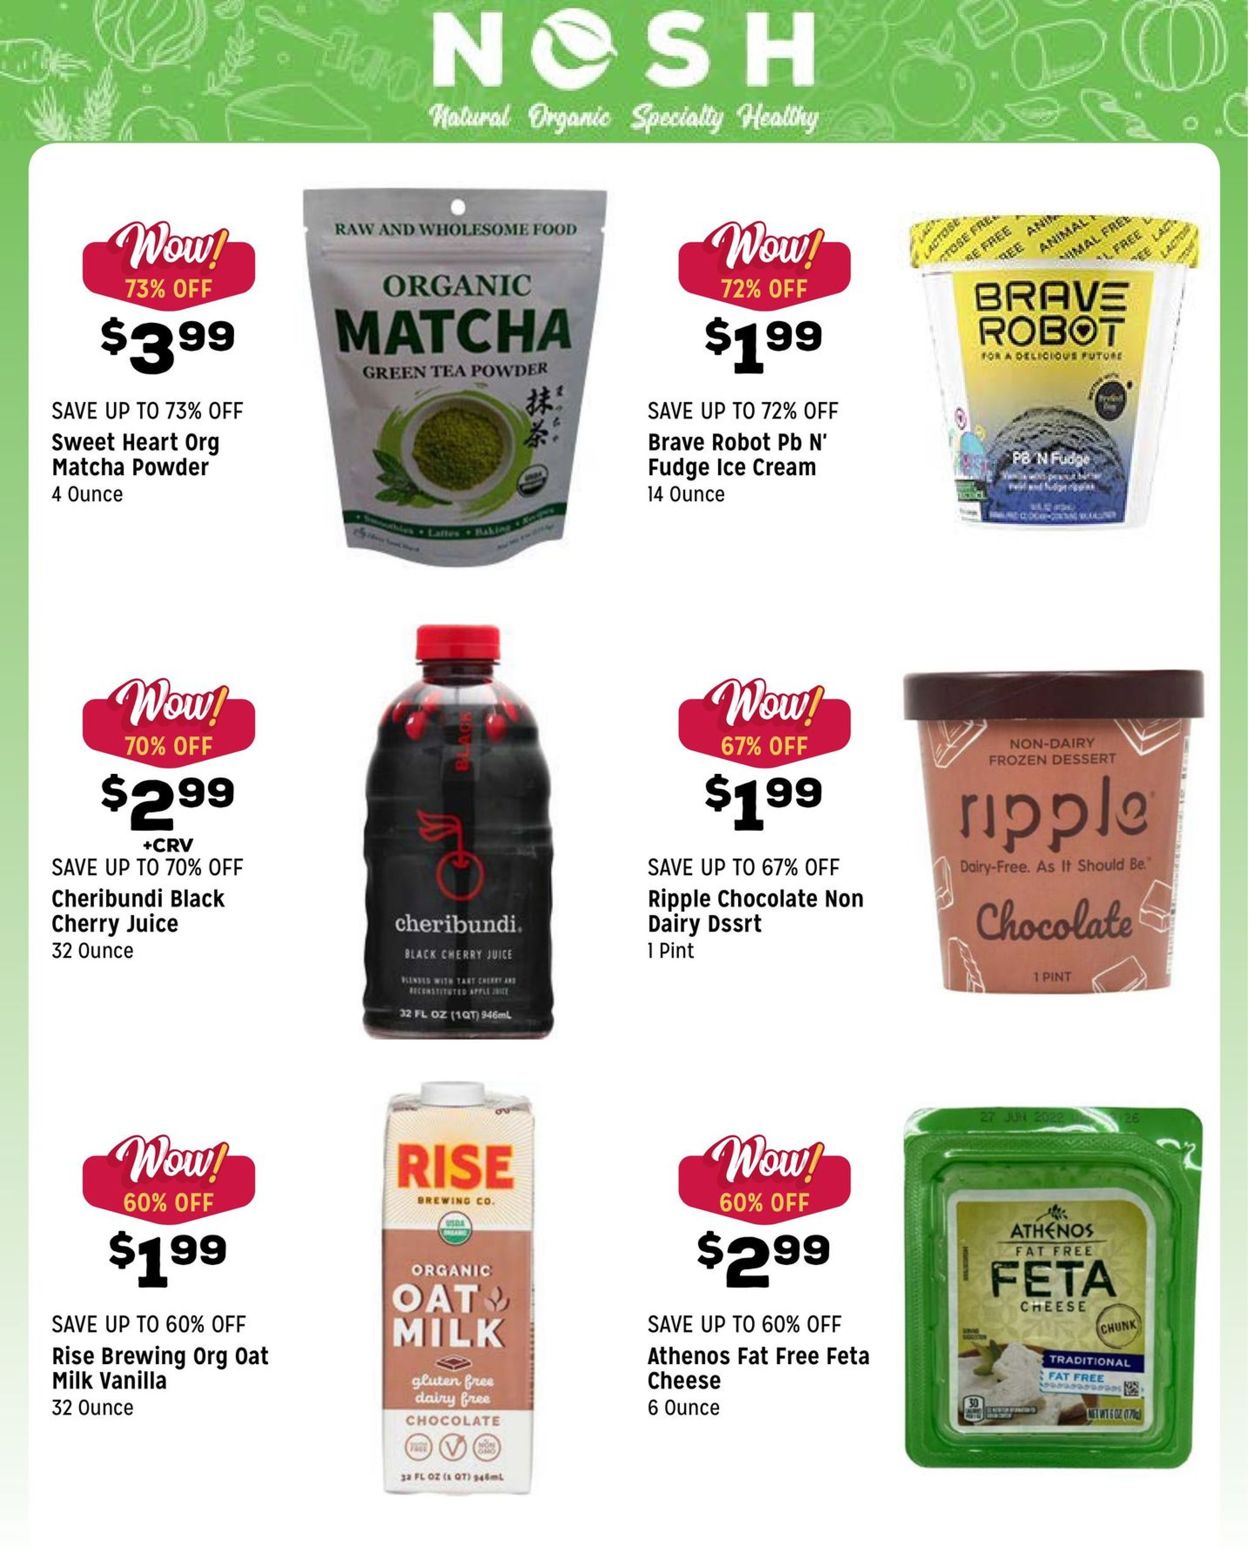 Grocery Outlet Weekly Ad Circular - valid 06/08-06/14/2022 (Page 2)